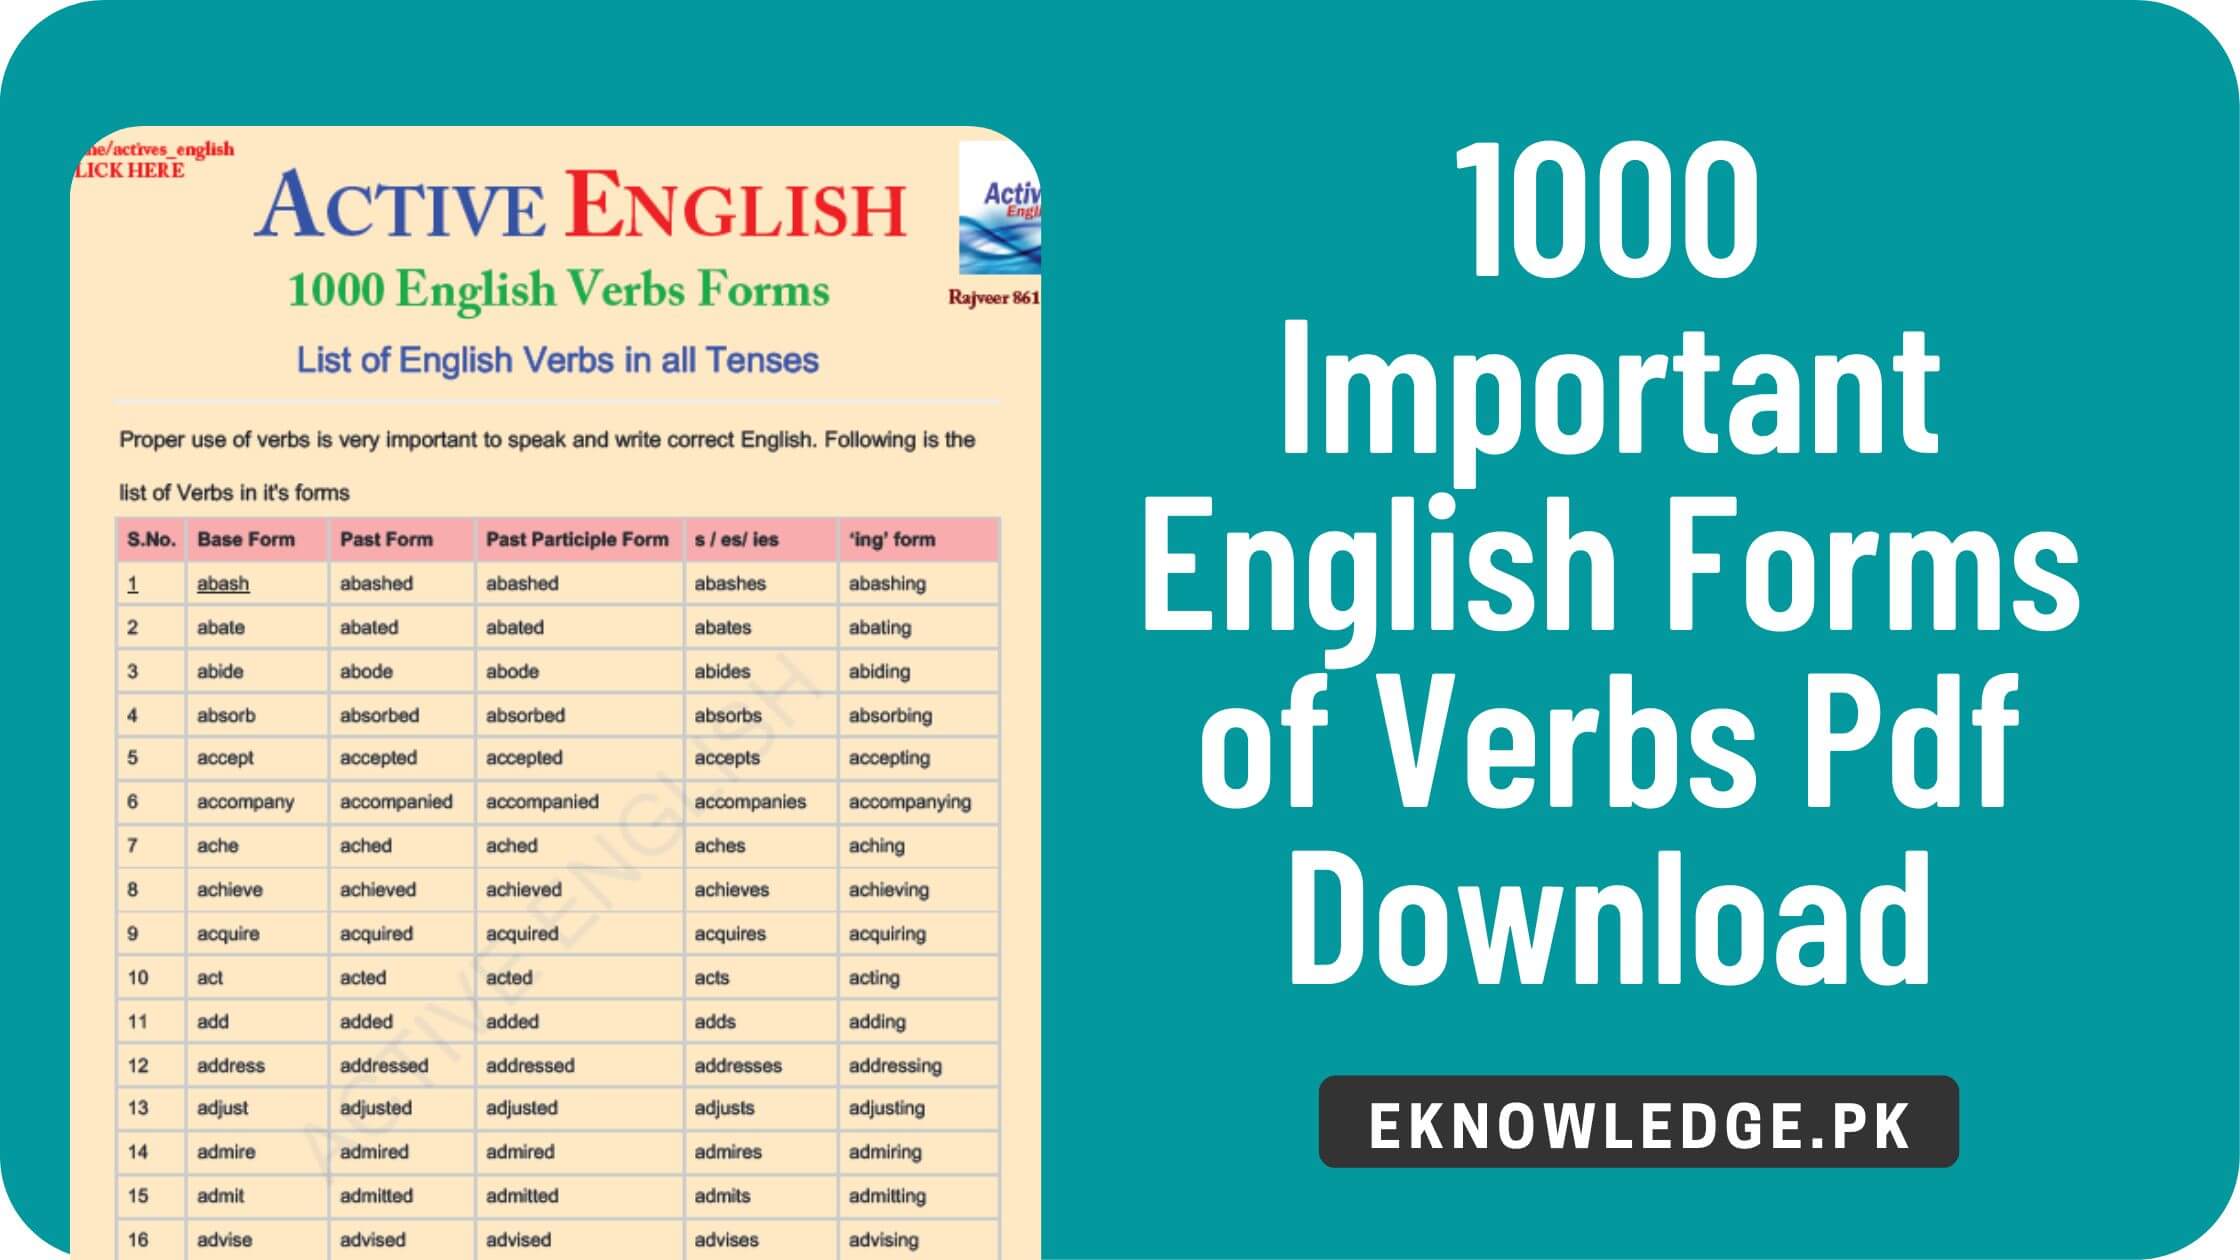 English-Forms-of-Verbs